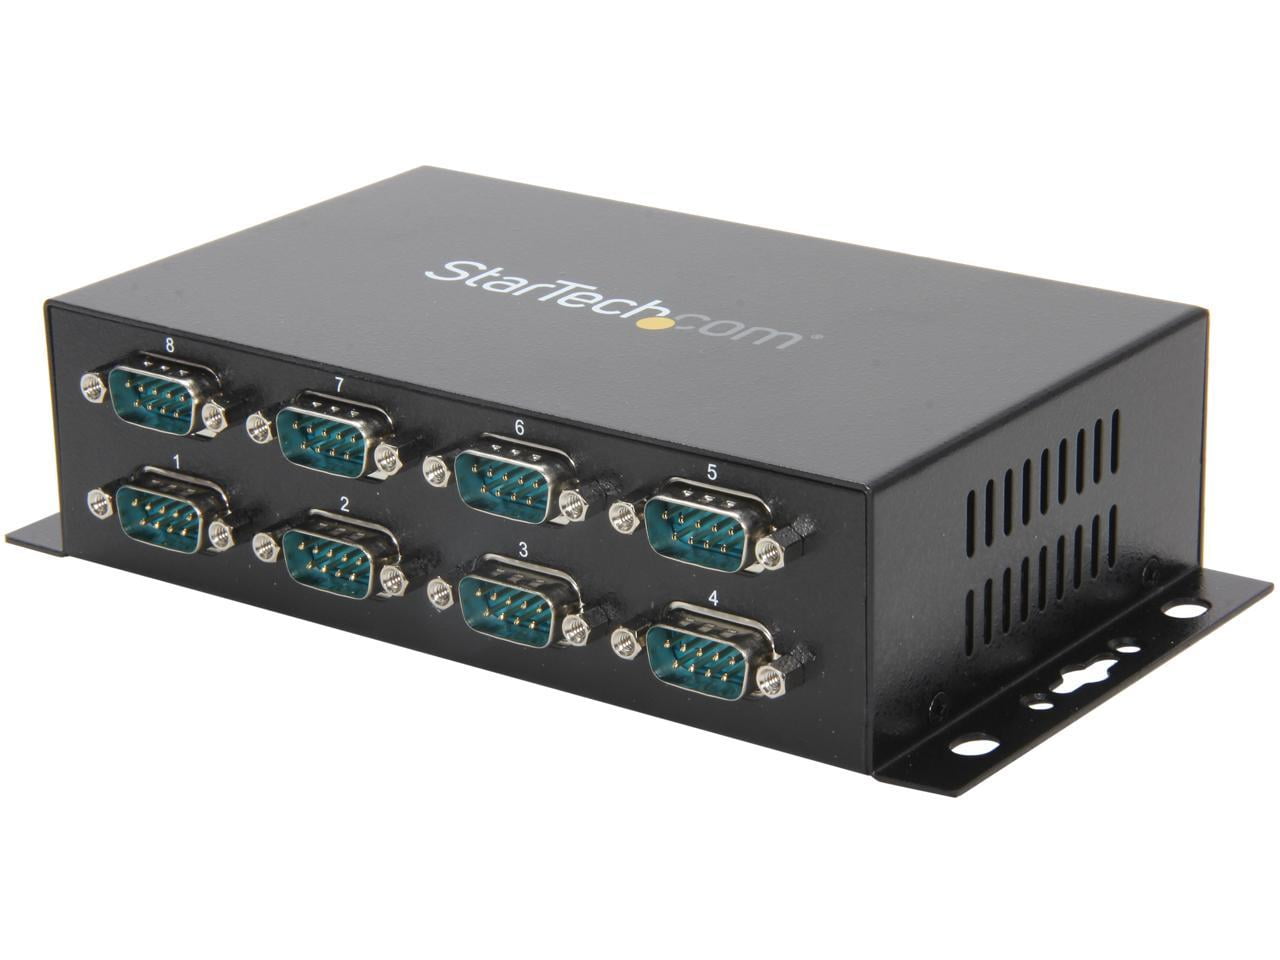 Startech Icusb2328I Add 8 Din Rail-Mountable Rs232 Serial Ports To Any ...